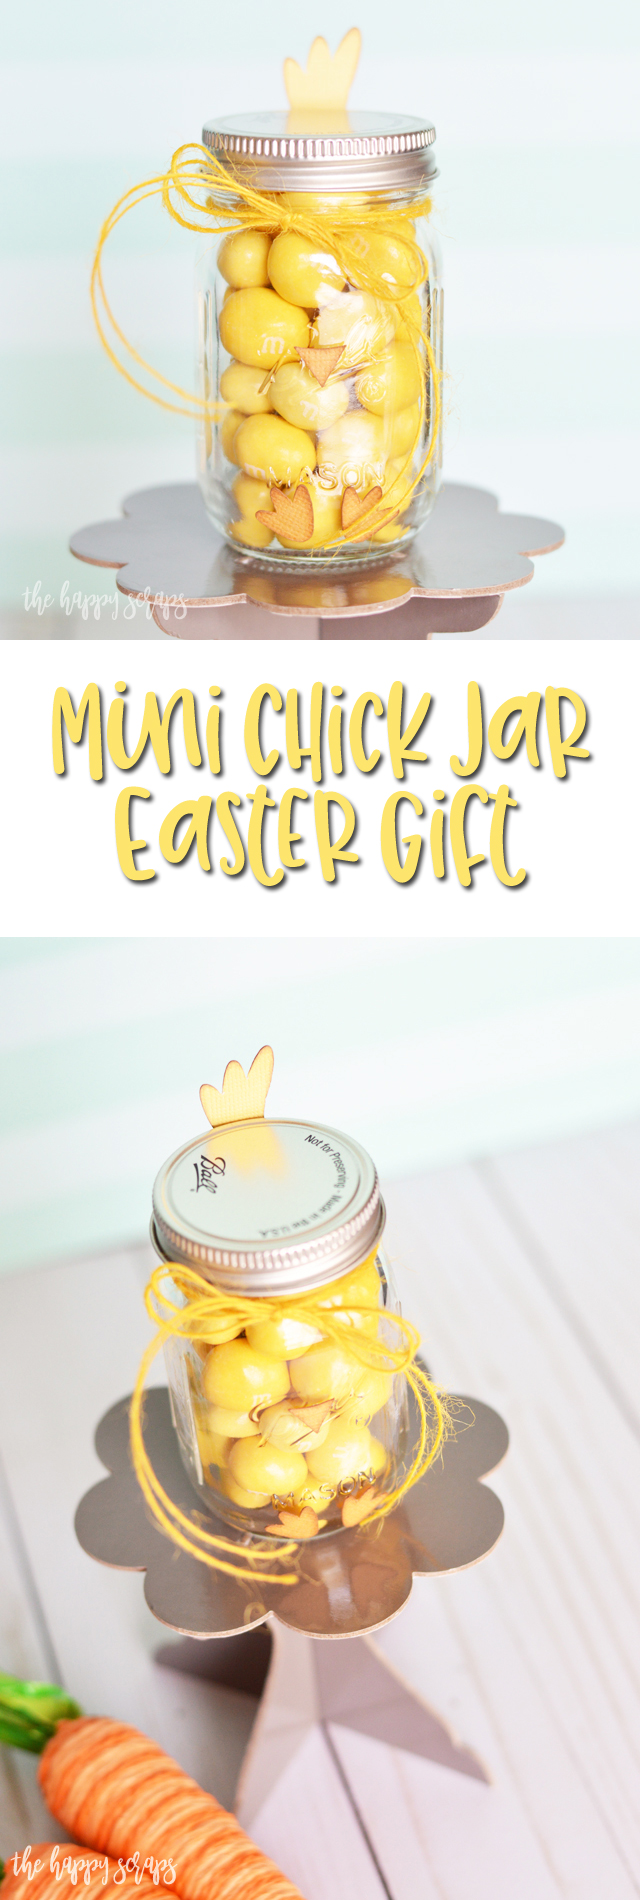 This Mini Chick Jar Easter Gift is the perfect little gift to put together for anyone for Easter. They are sure to love it, and the jar is just the right size for the perfect amount of chocolate candies. 